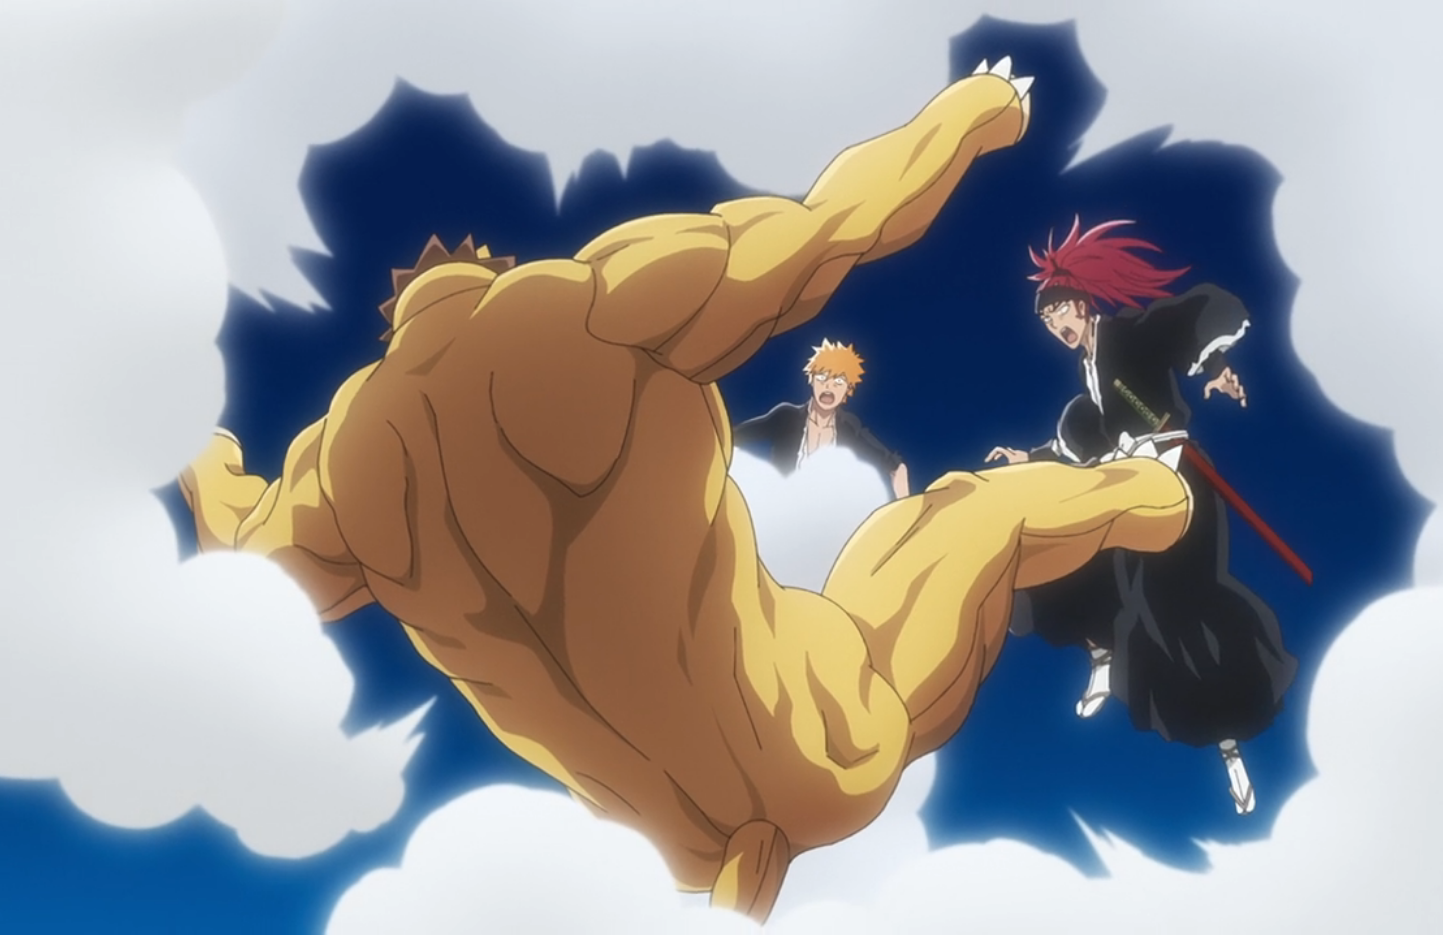 Bleach: TYBWA Episode 9 Preview Revealed - Anime Corner